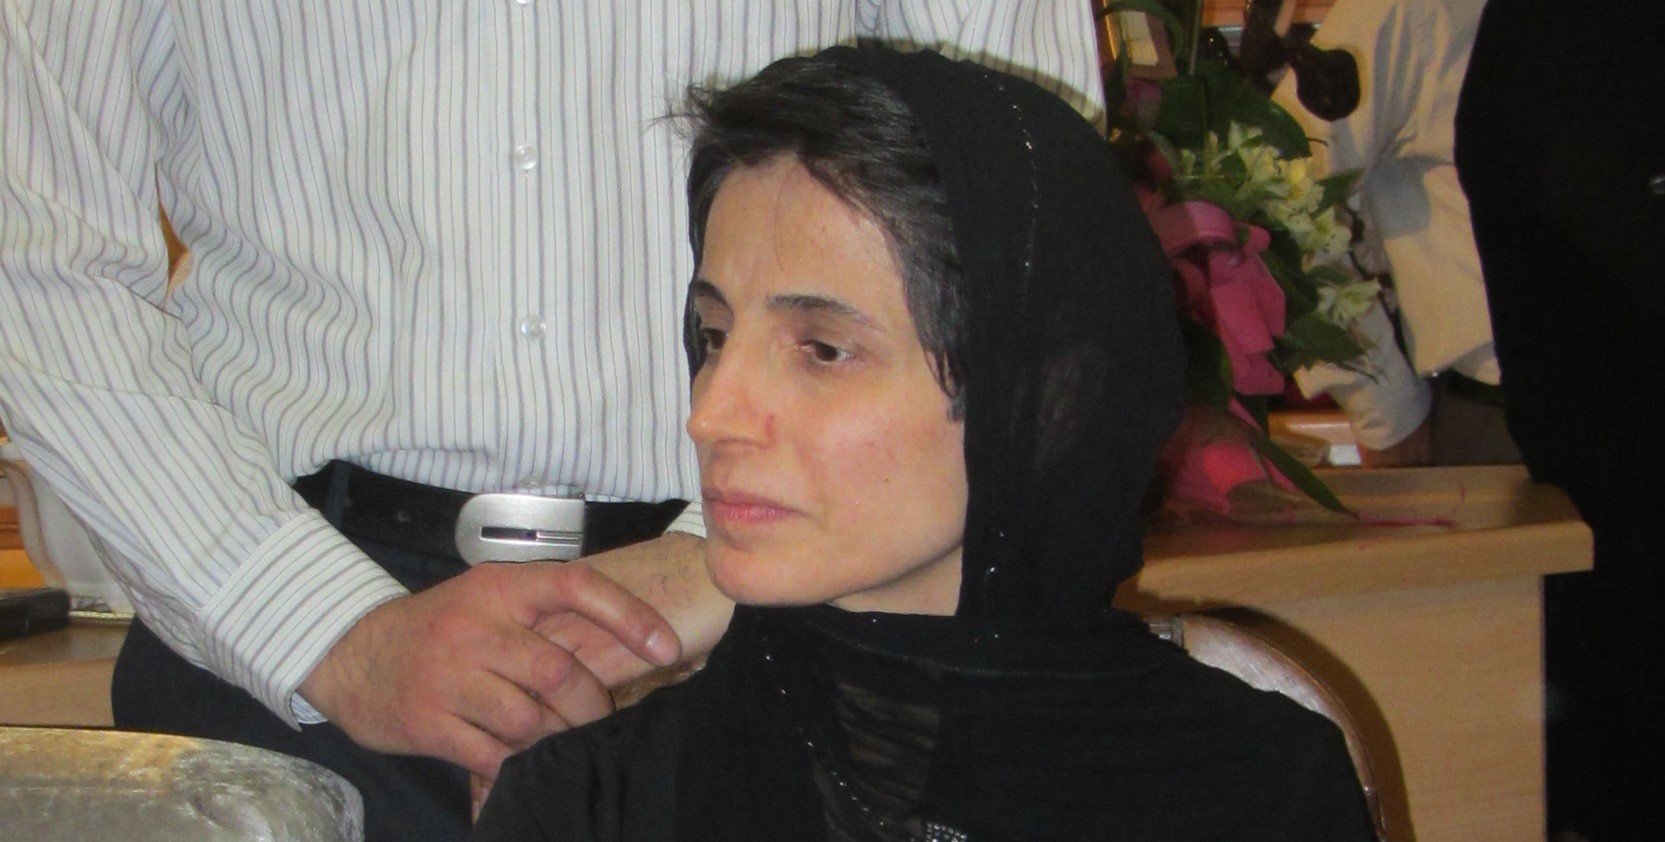 Iran human rights lawyer sentenced to 38 years in prison with 148 lashes: husband